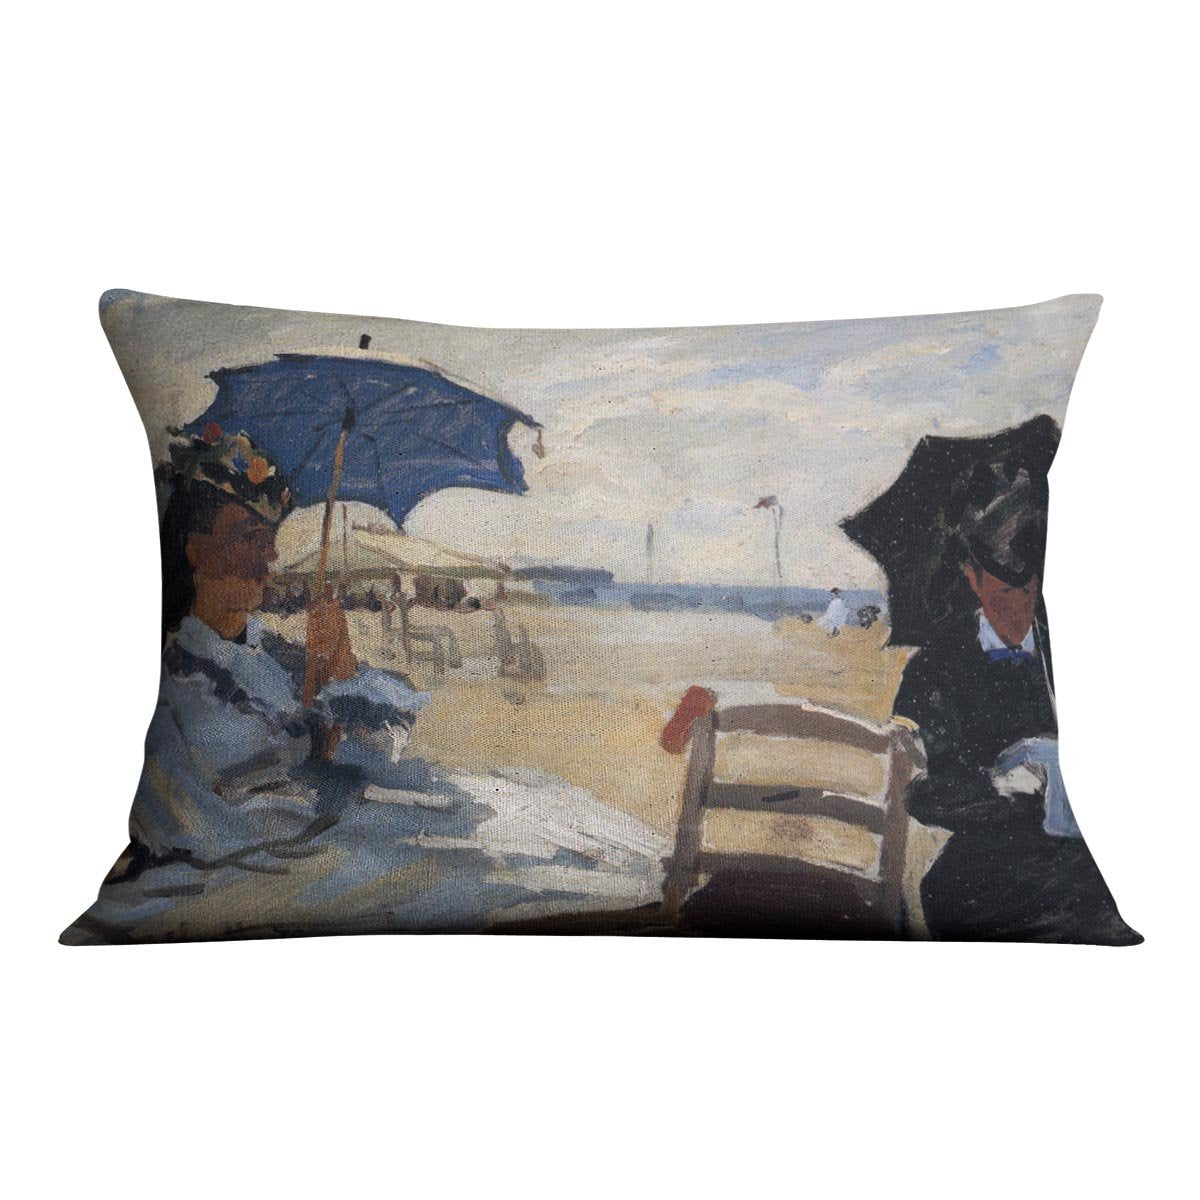 The beach a Trouville by Monet Throw Pillow